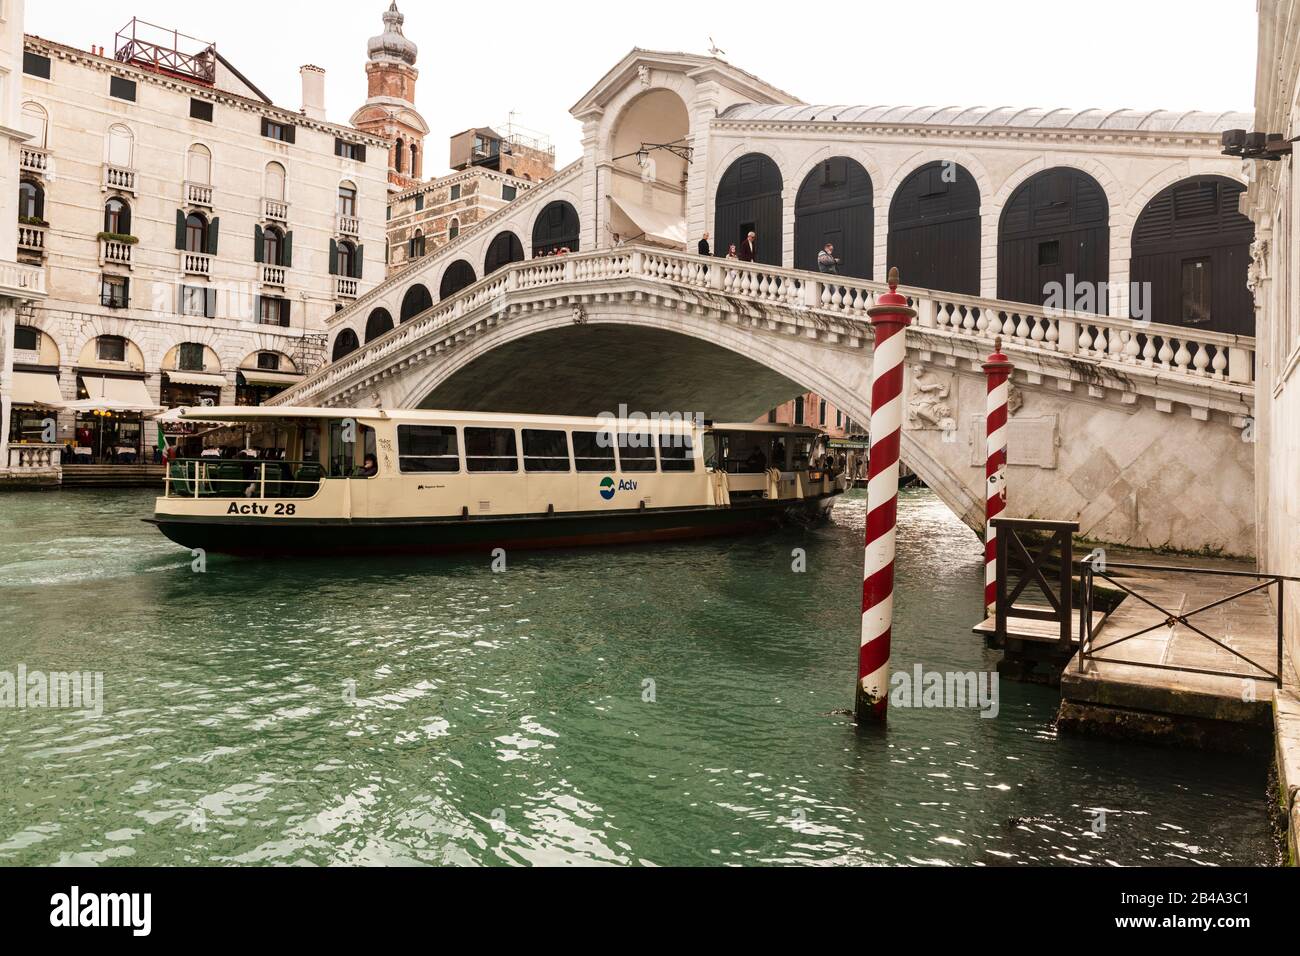 Venice, February 25th - March 3rd. 2020: Ponte Rialto, one of the most popular tourist attractions on the island without its normal hoard of tourists because they have cancelled their visit to Venics due to the Coronavirus epidemic. Stock Photo